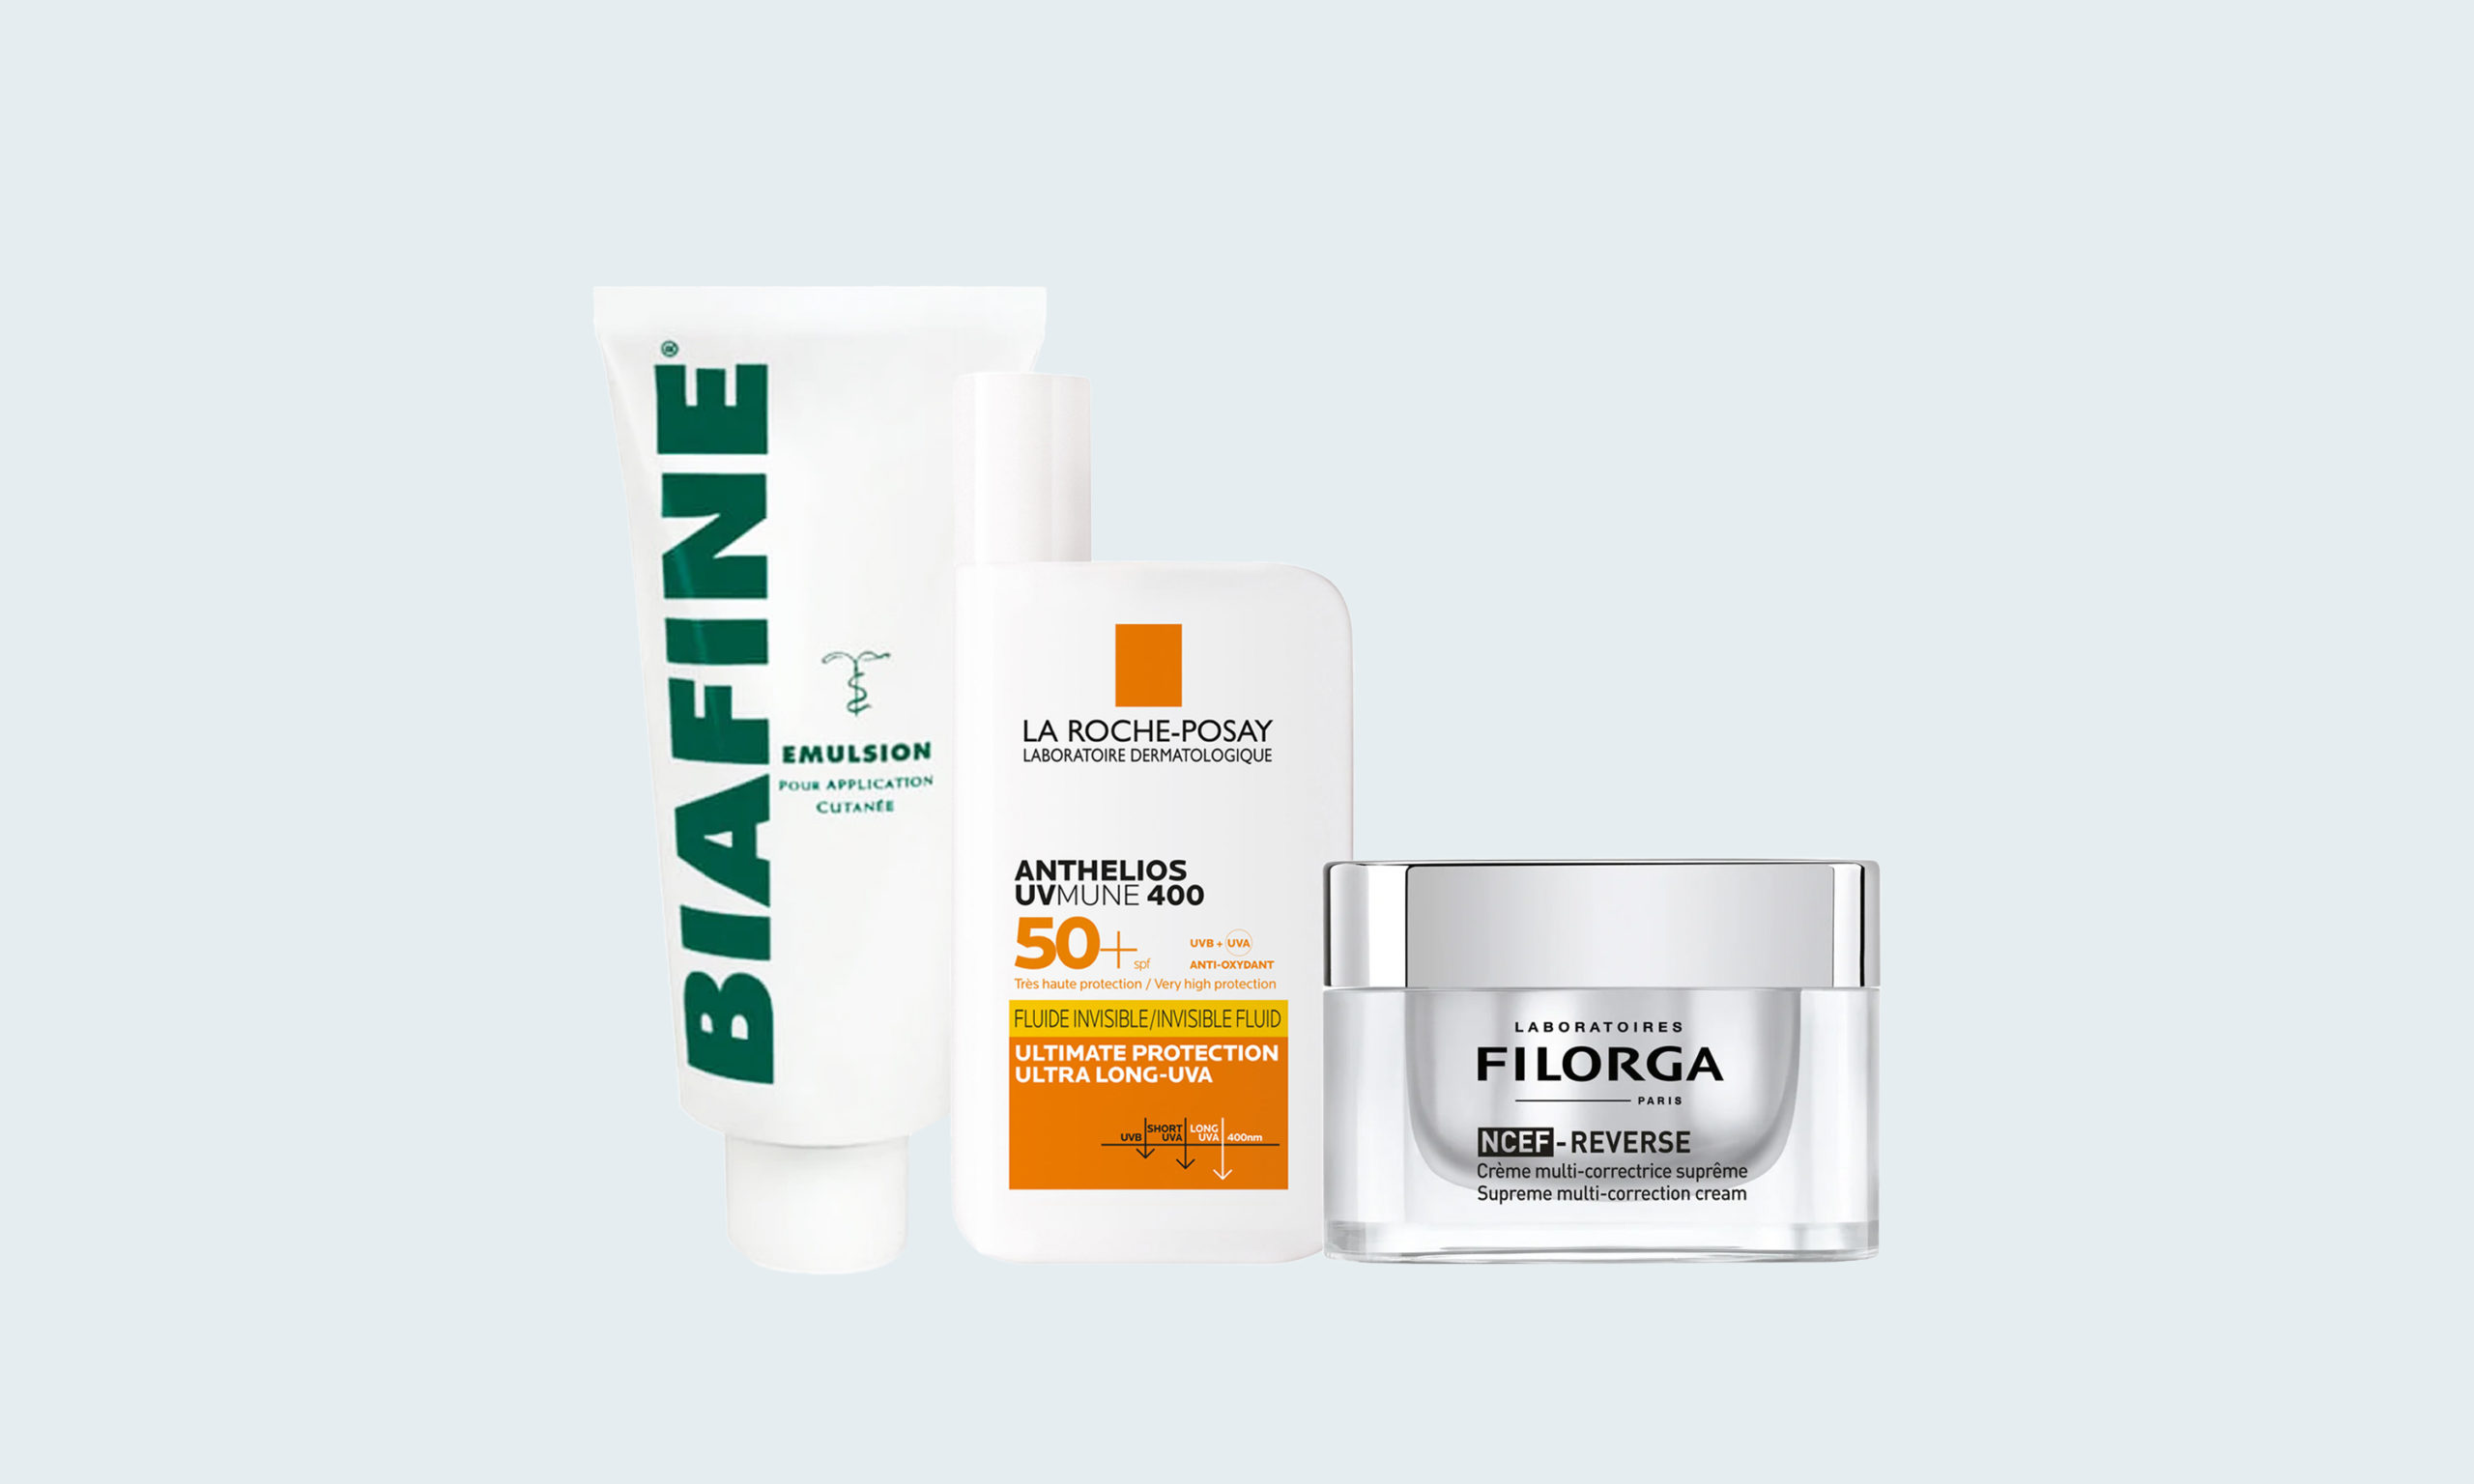 10 French Skin-Care Products Dermatologists are Obsessed
With